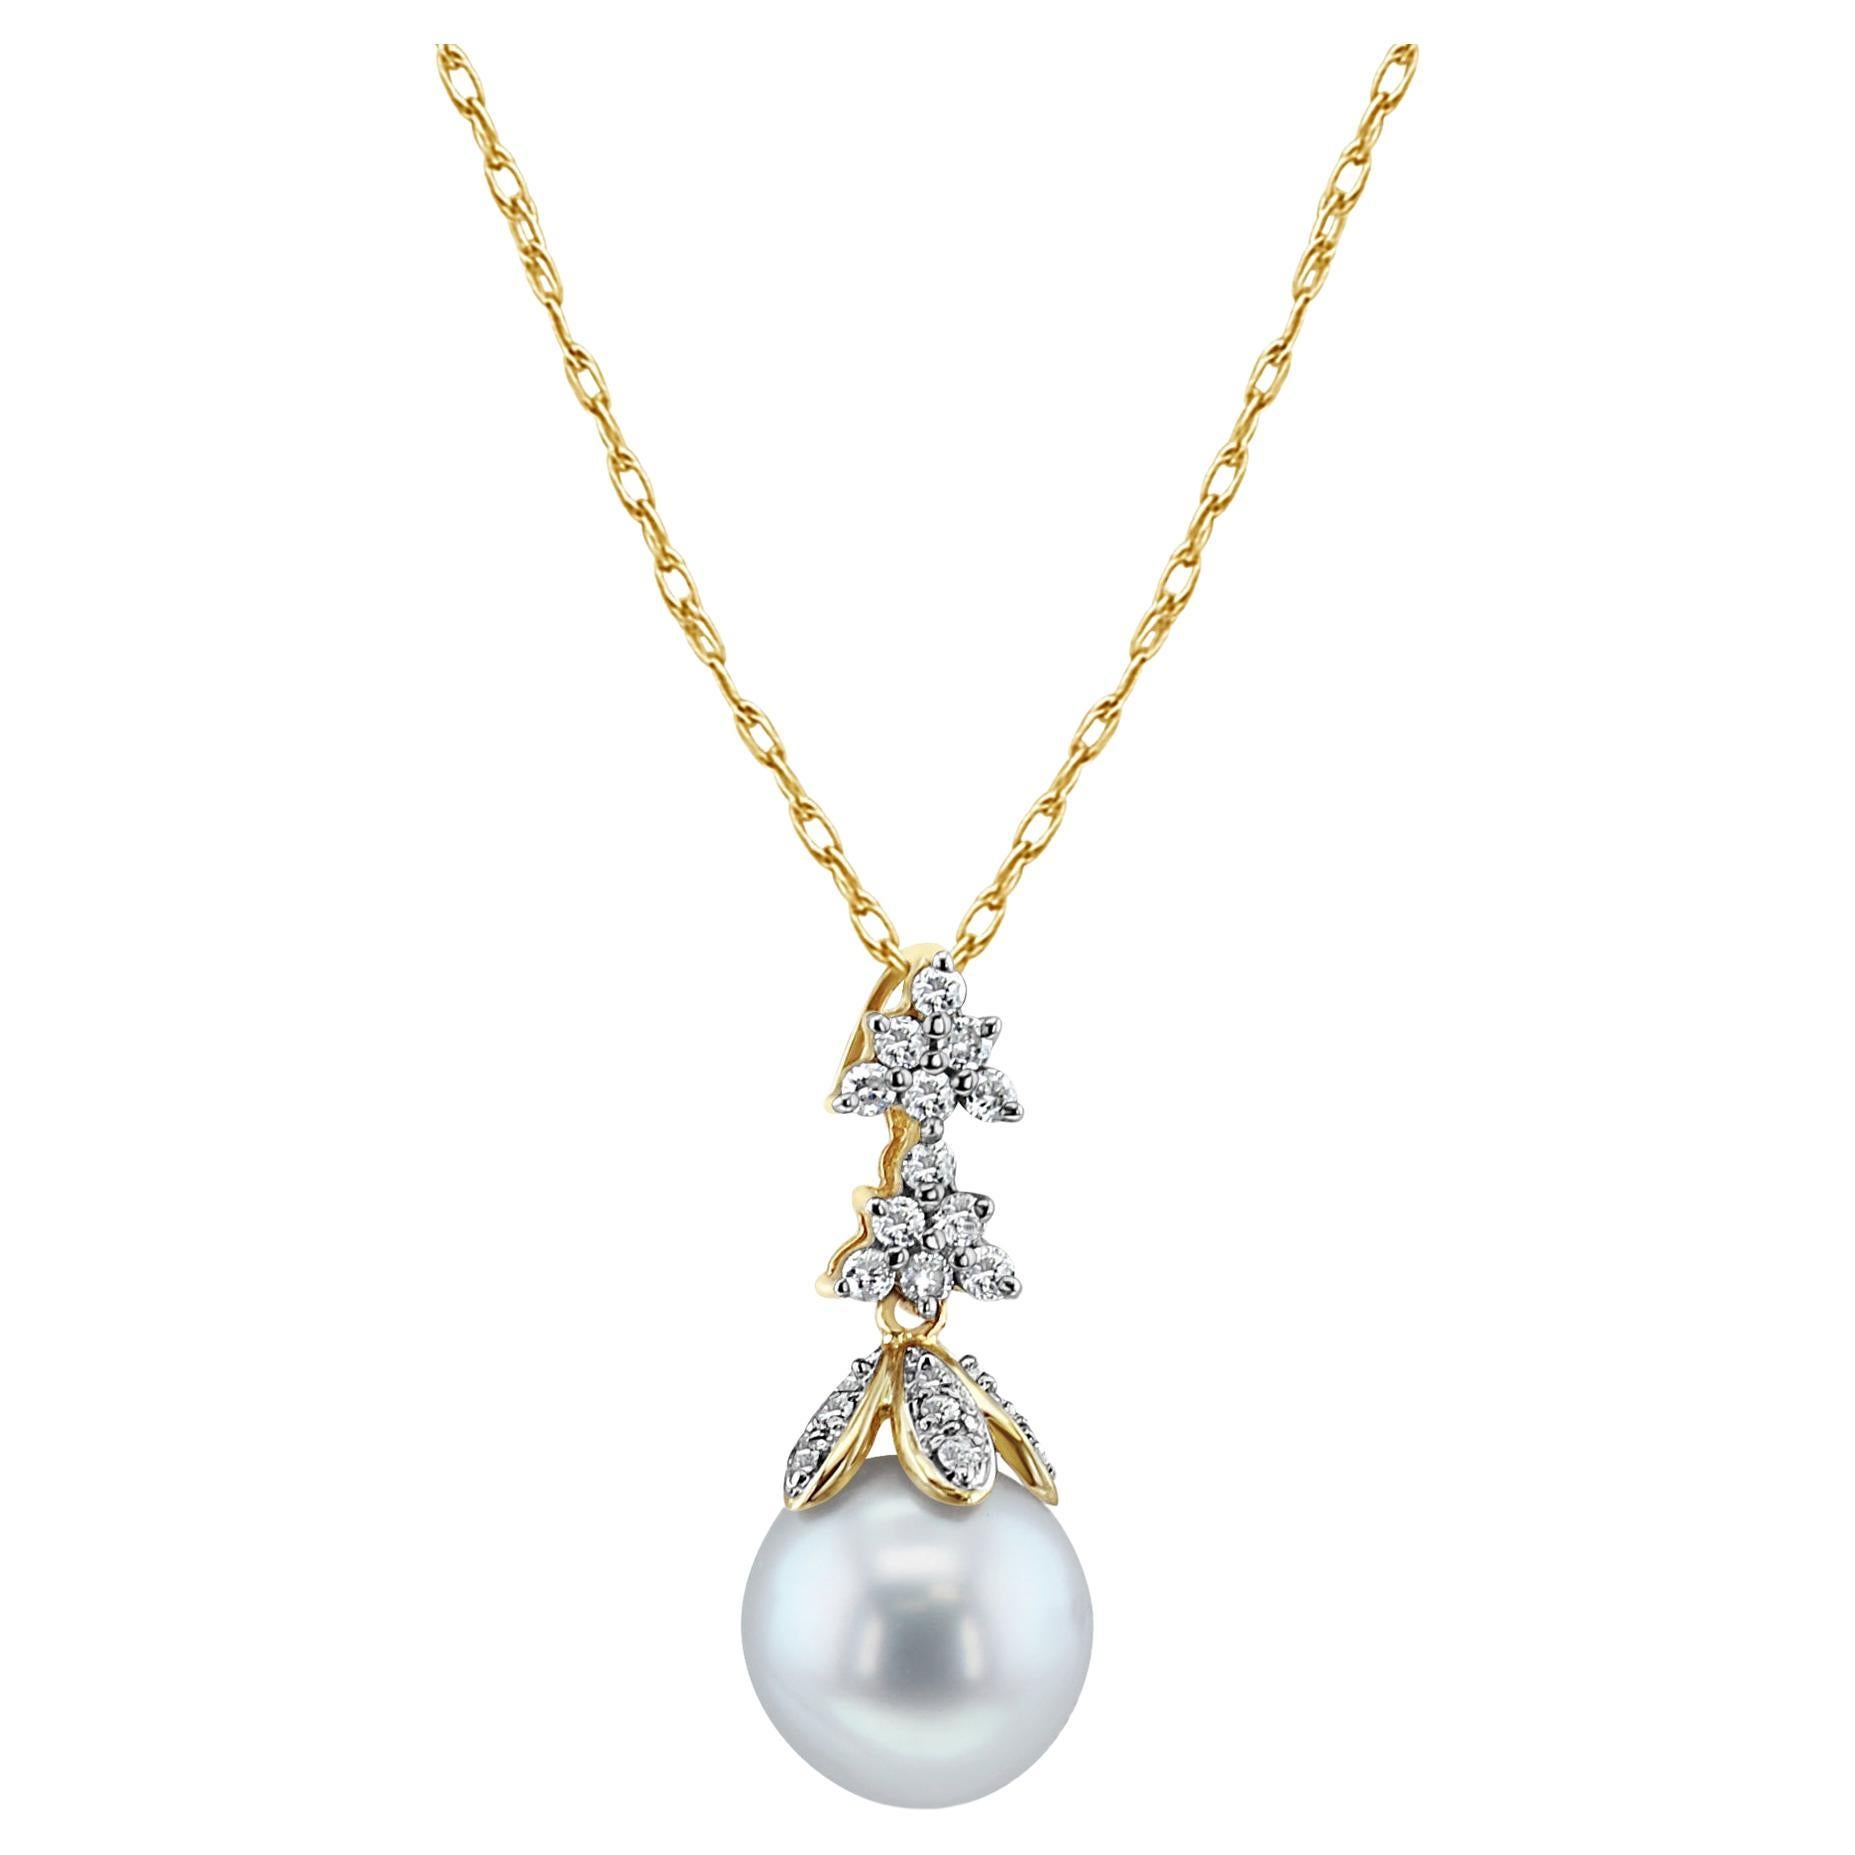 10mm Dangling Pearl Necklace with Diamond Accents .25cttw 14k Yellow Gold For Sale